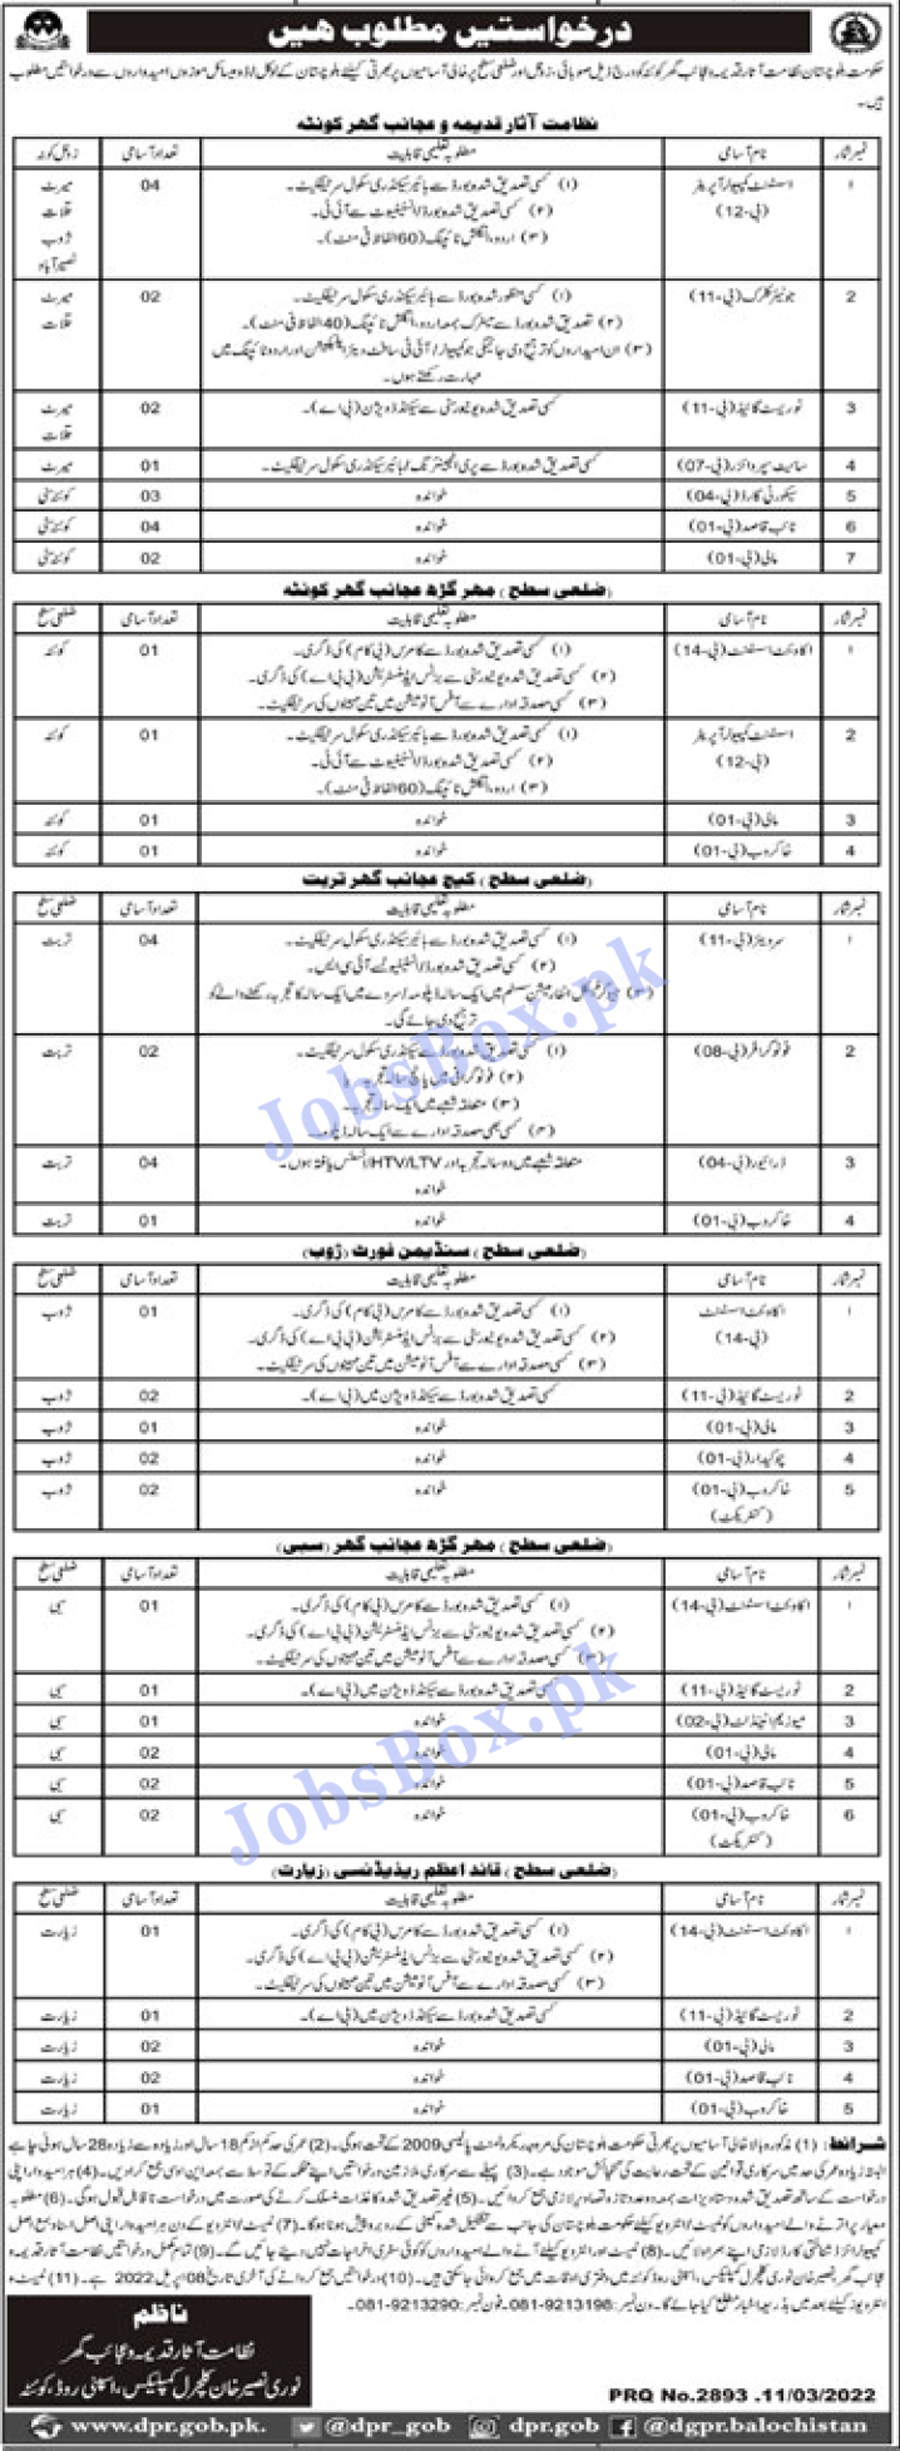 Directorate of Archaeology and Museums Balochistan jobs 2022